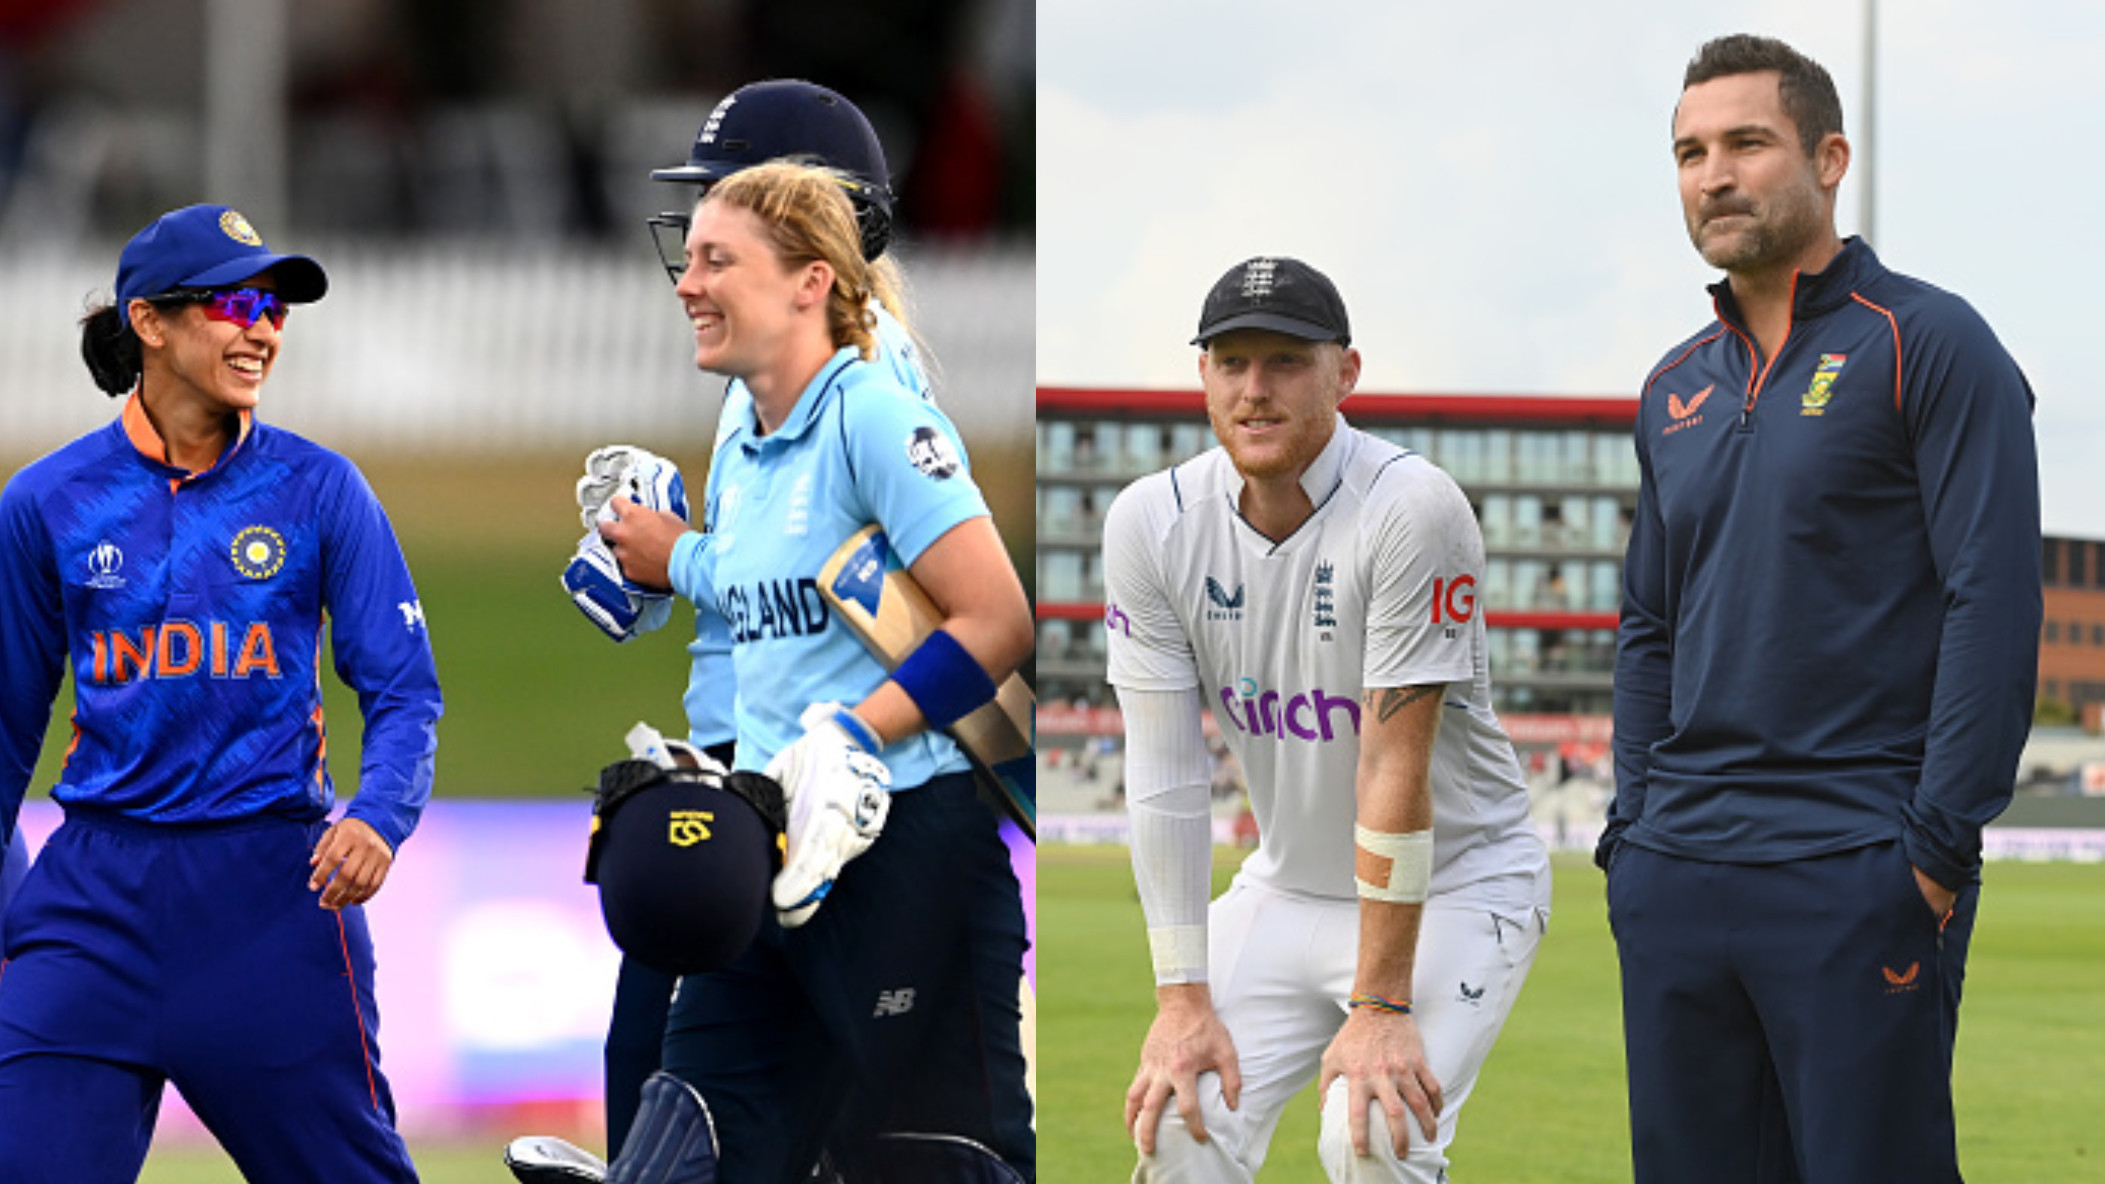 India-England Women's T20I to go on as planned; ENG-SA 3rd Men's Test to resume on Saturday after Queen’s demise